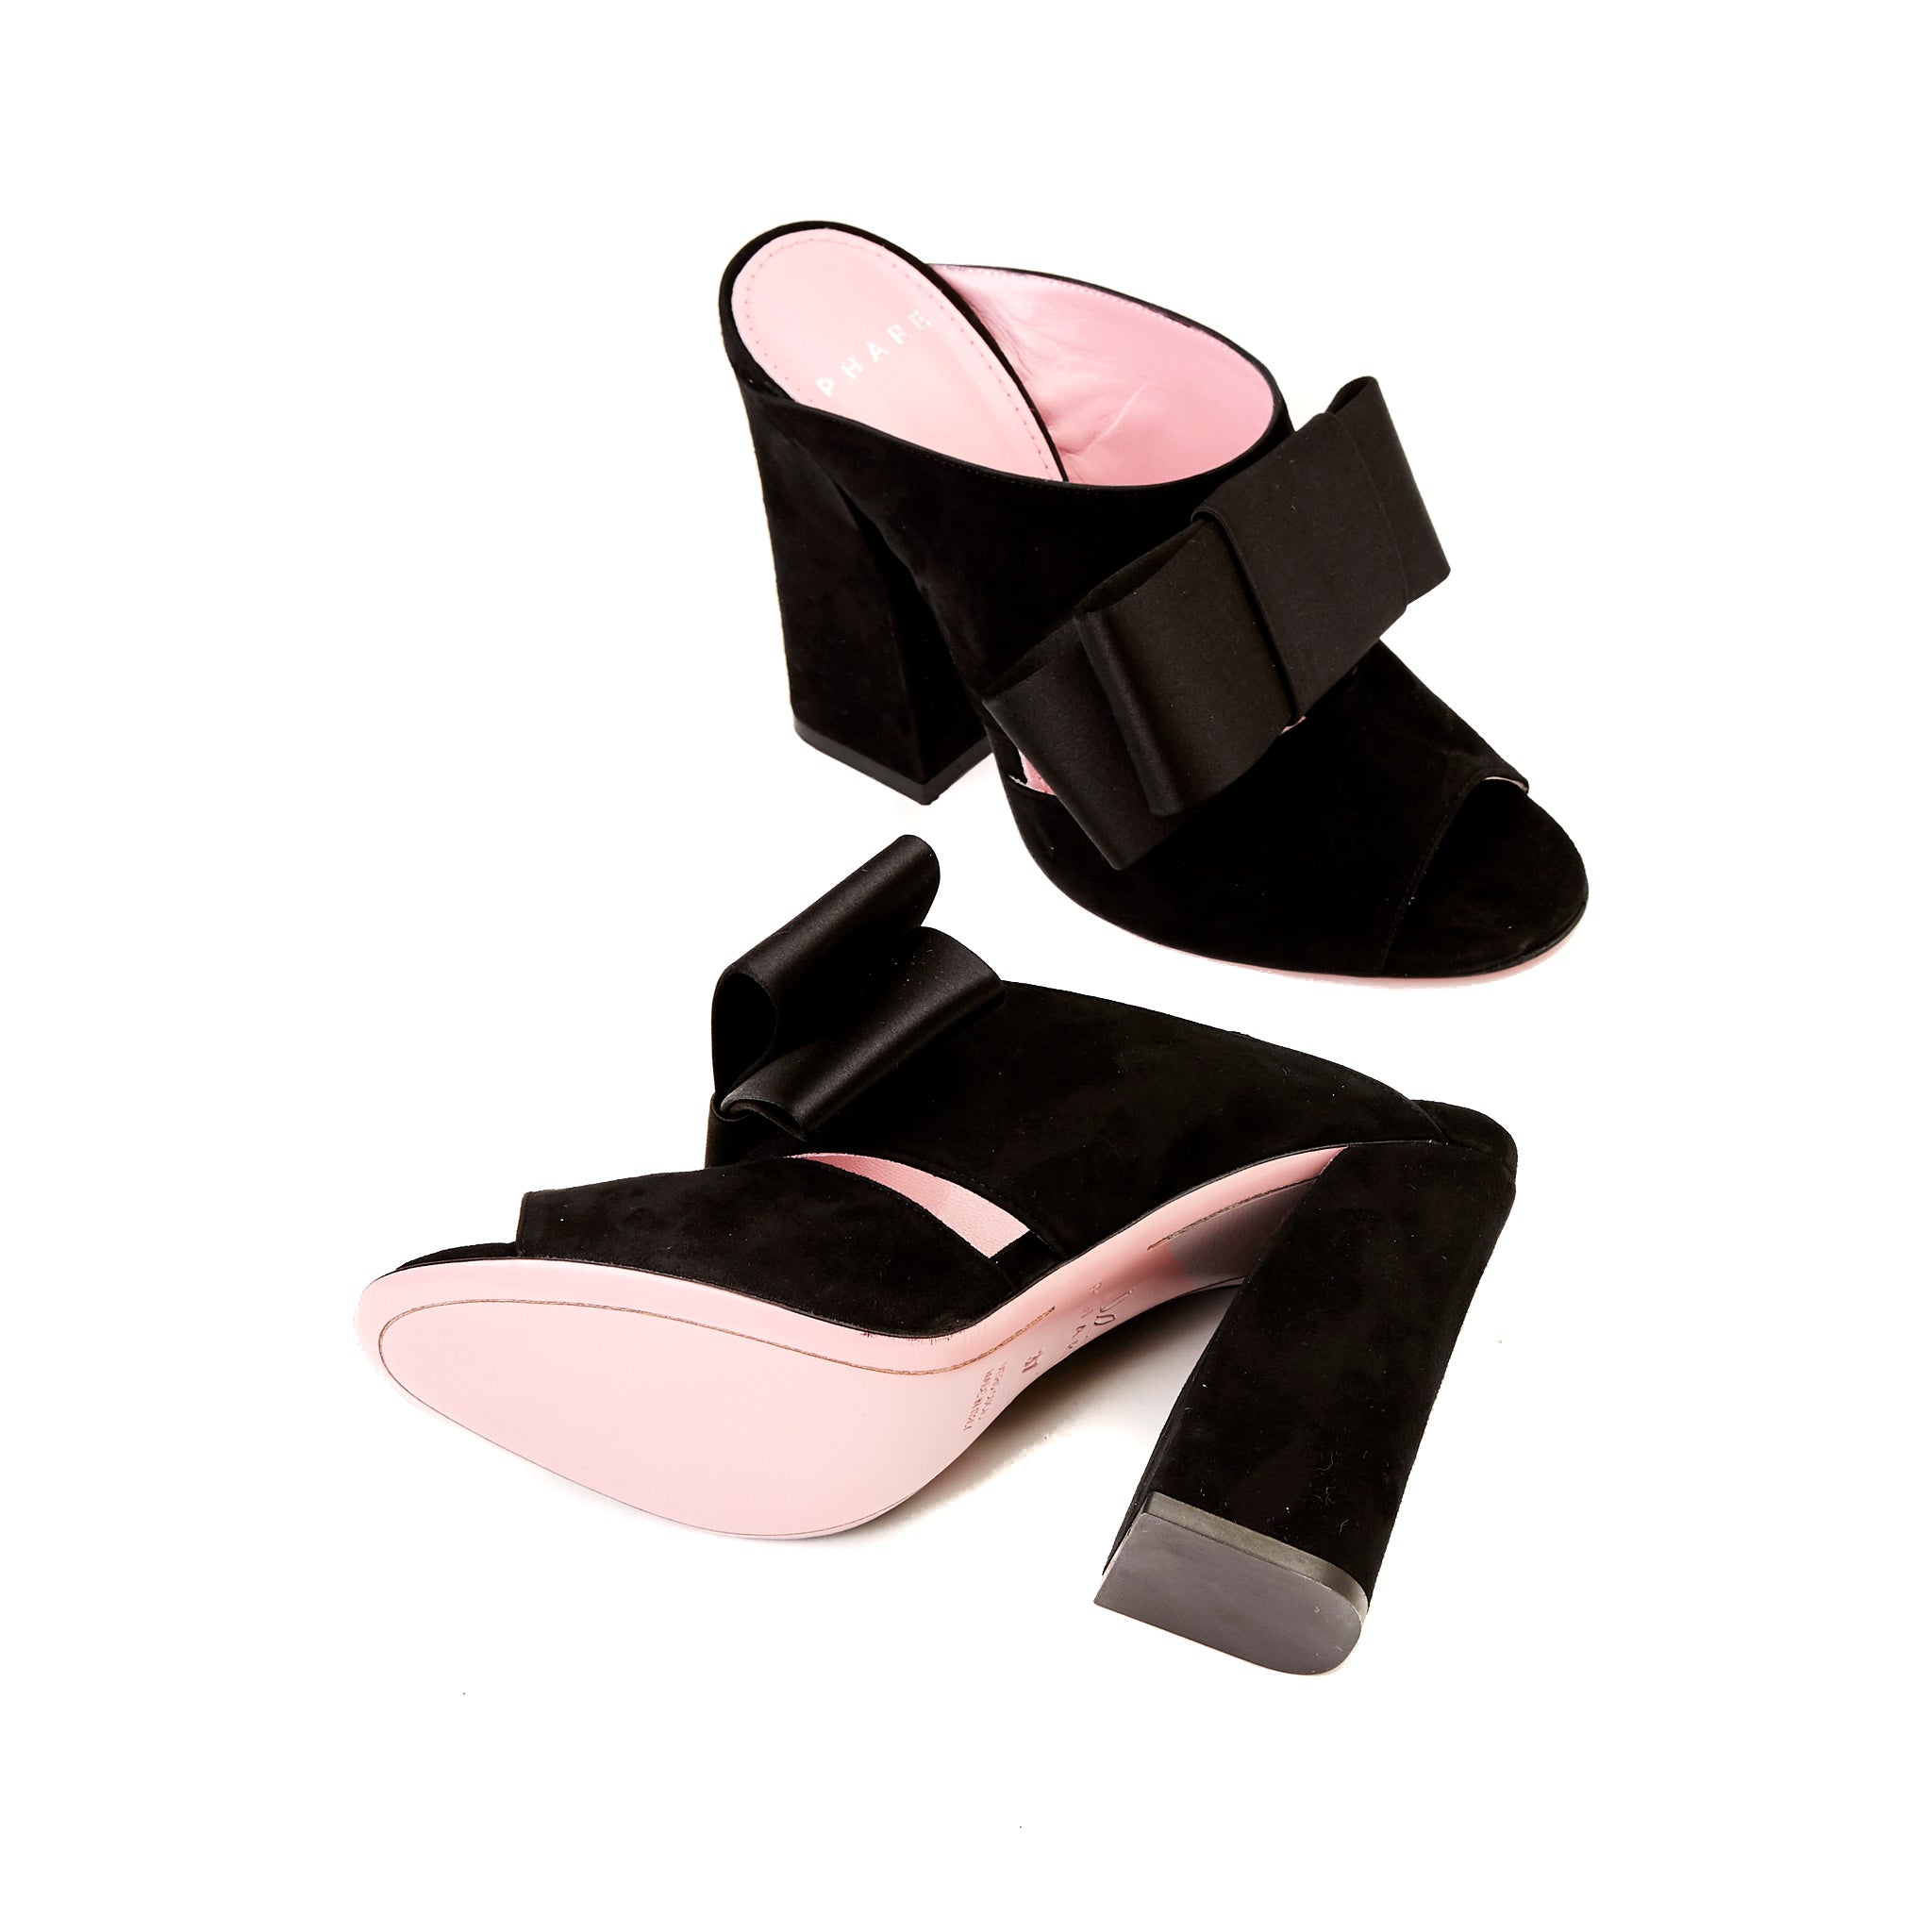 Phare High heel block heel mule with bow in black suede and satin back view 